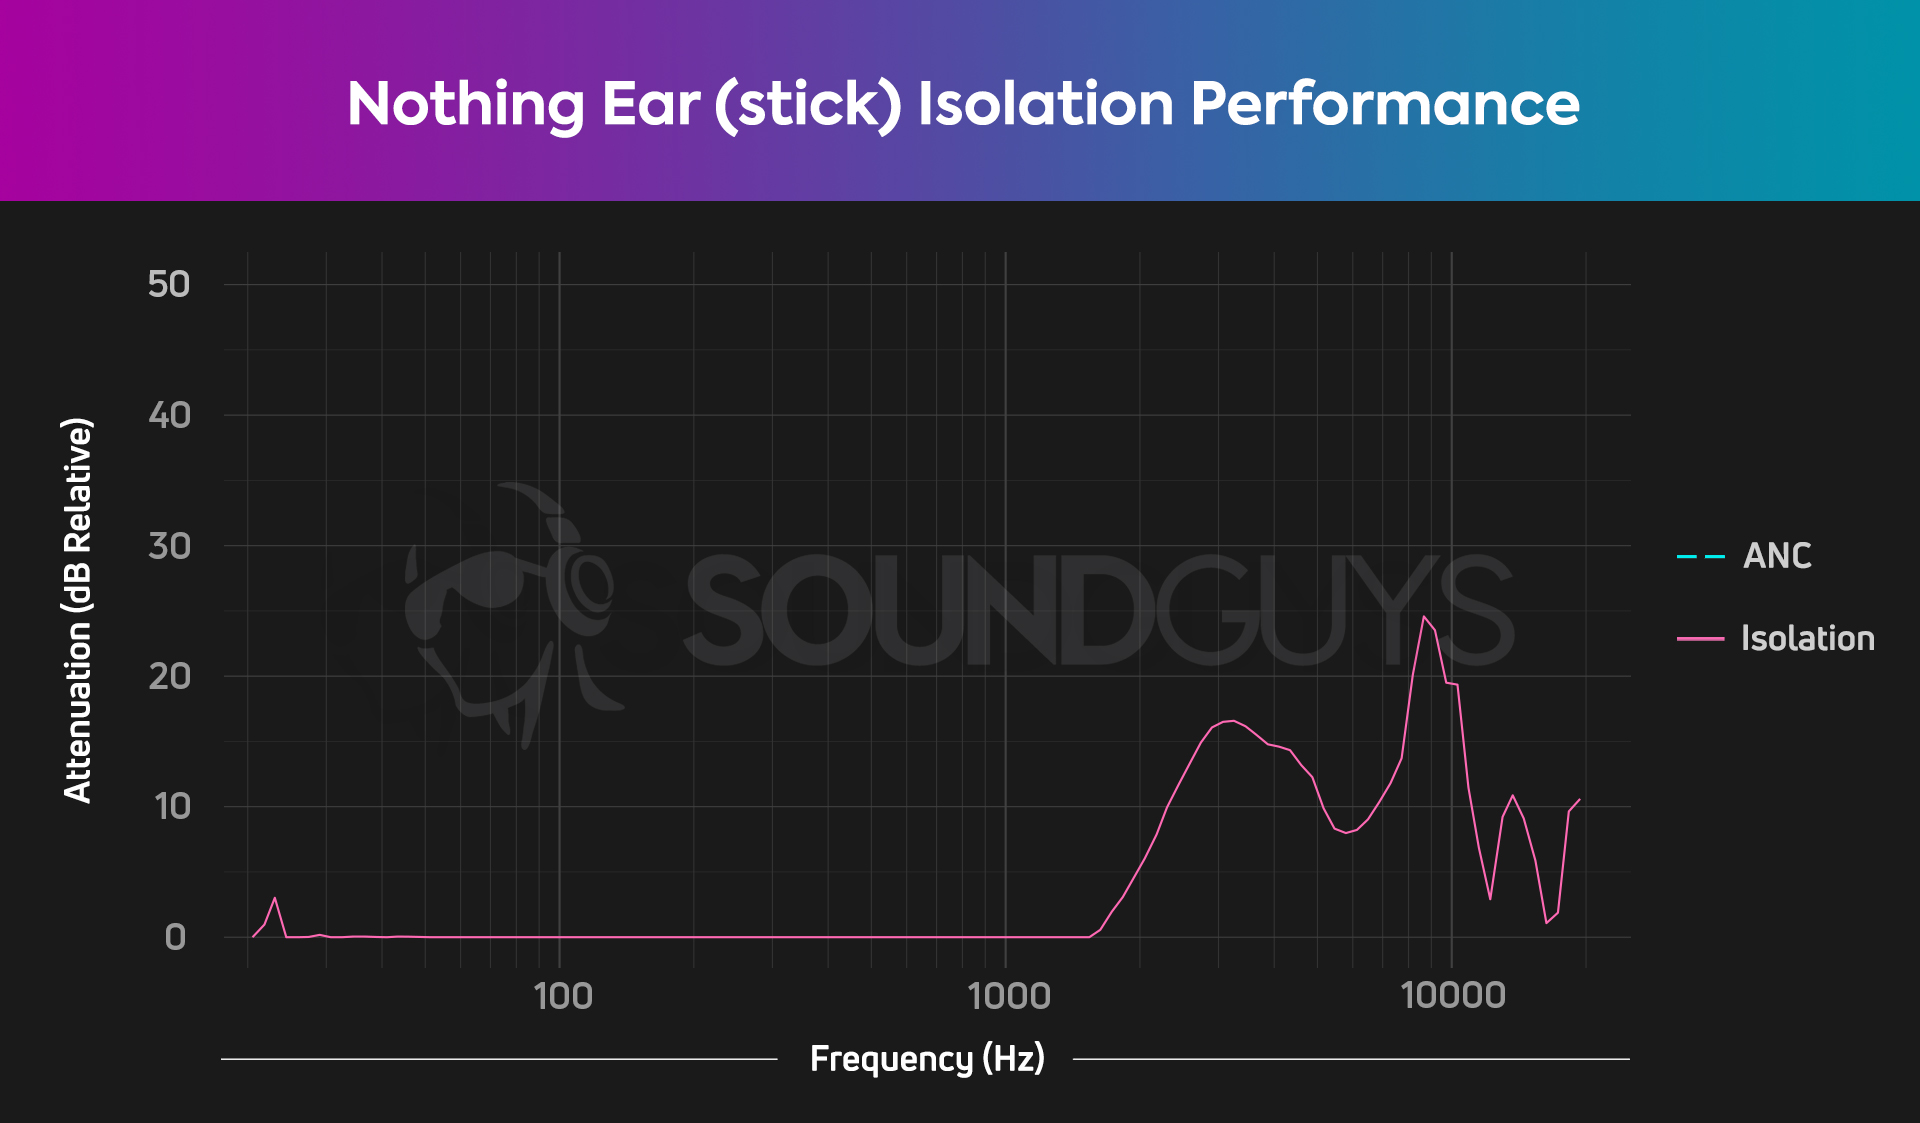 A chart shows the minimal isolation of the Nothing Ear (stick).